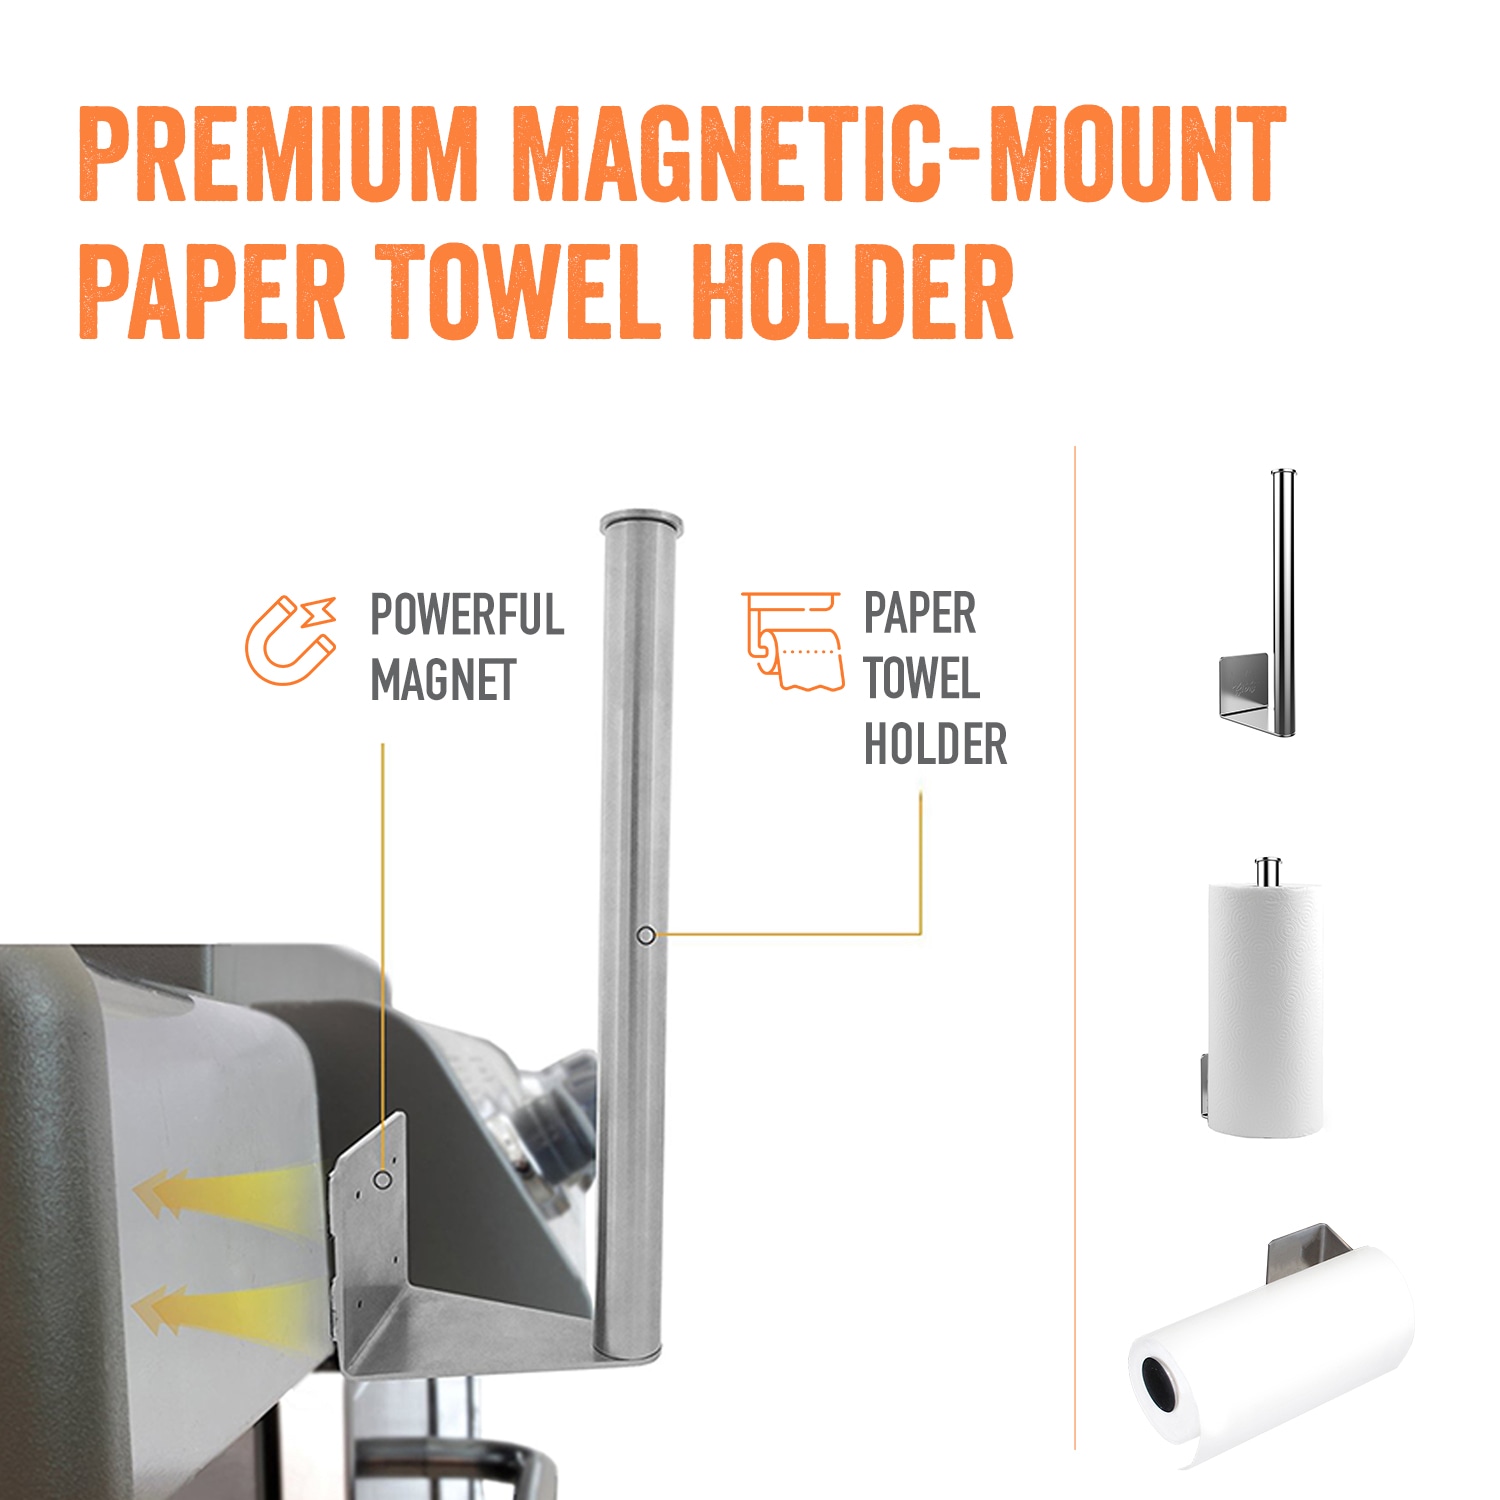 Recommendations on how to mount a paper towel holder? : r/GoRVing